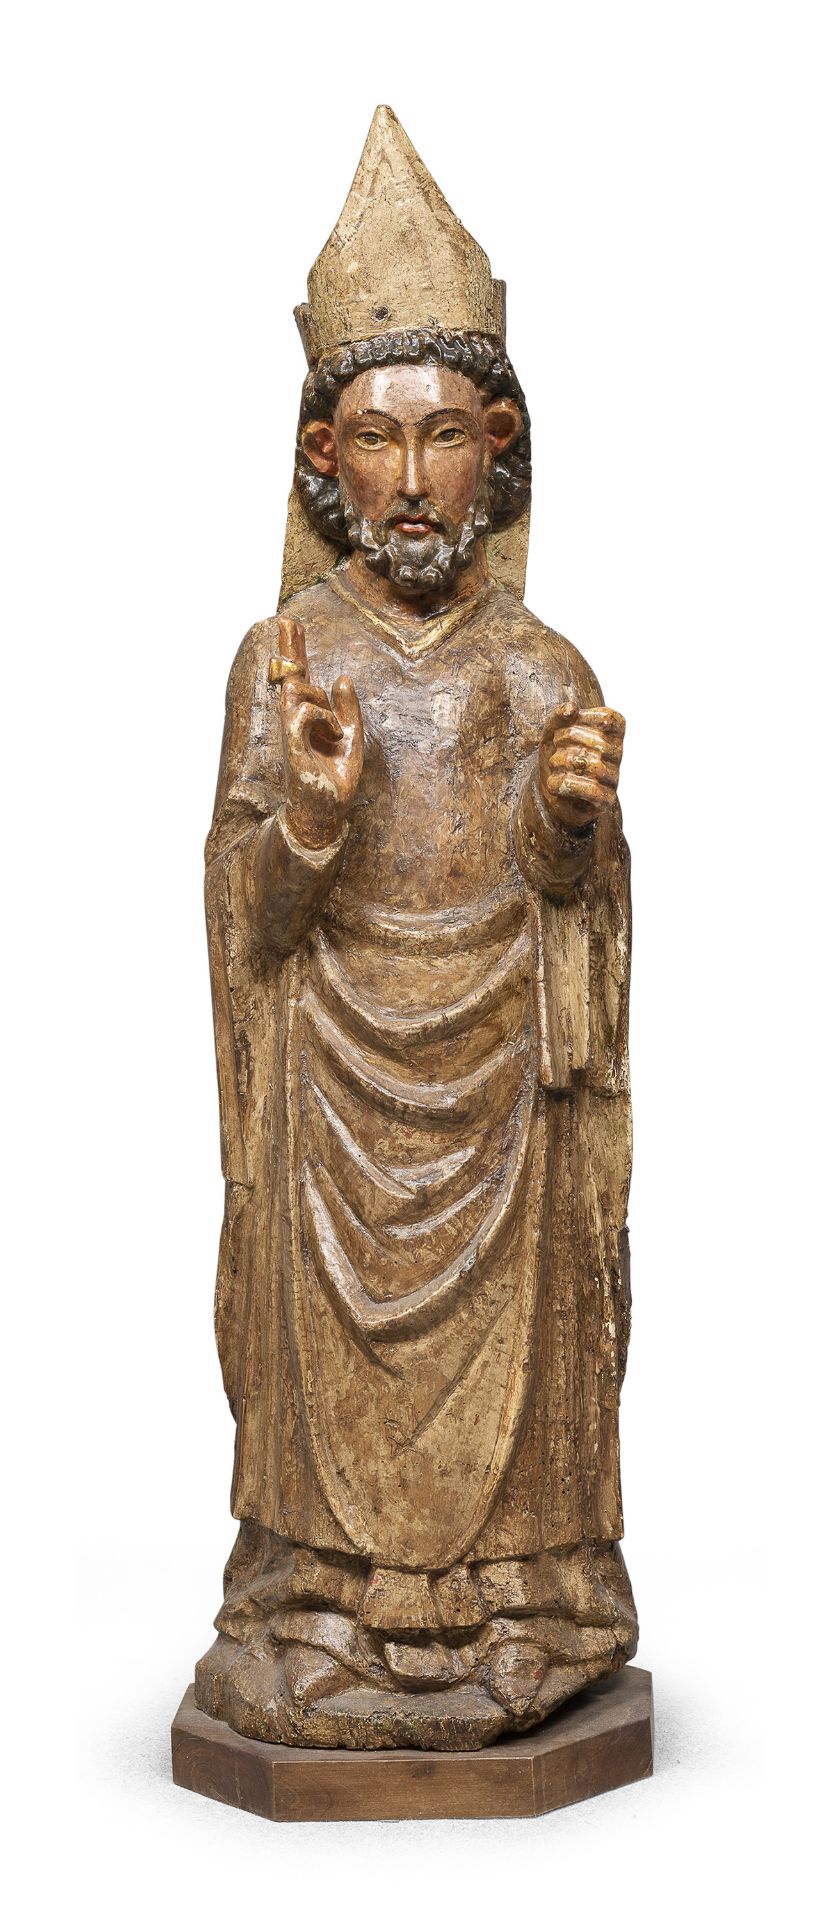 SCULPTURE OF HOLY BISHOP SPAIN 16TH CENTURY